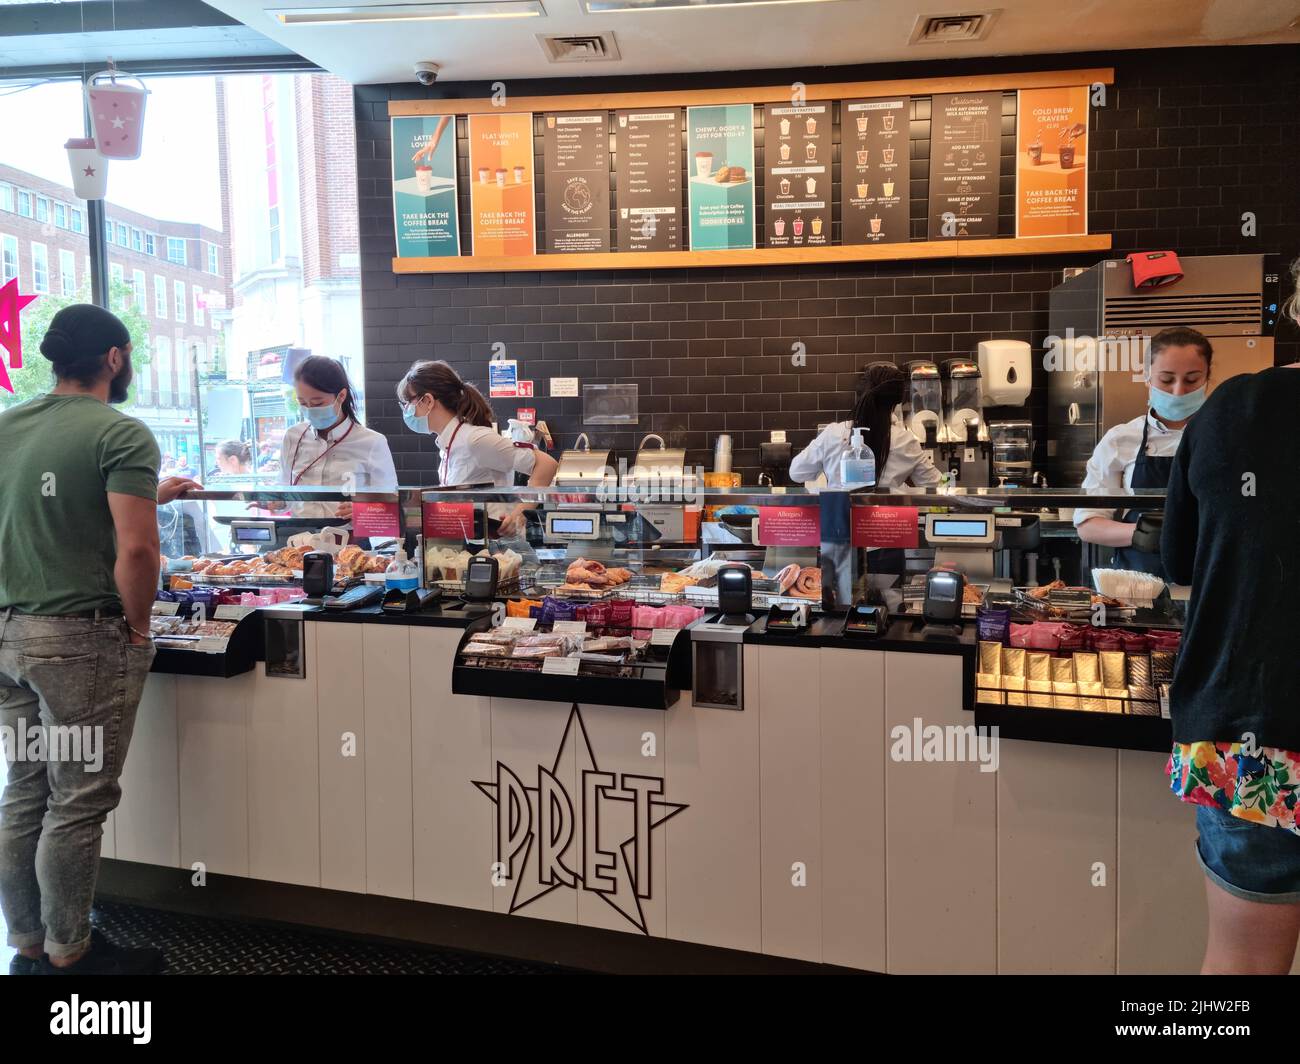 Exeter, UK - August 2021 - Customers being served at a Pret A Manger restaurant Stock Photo